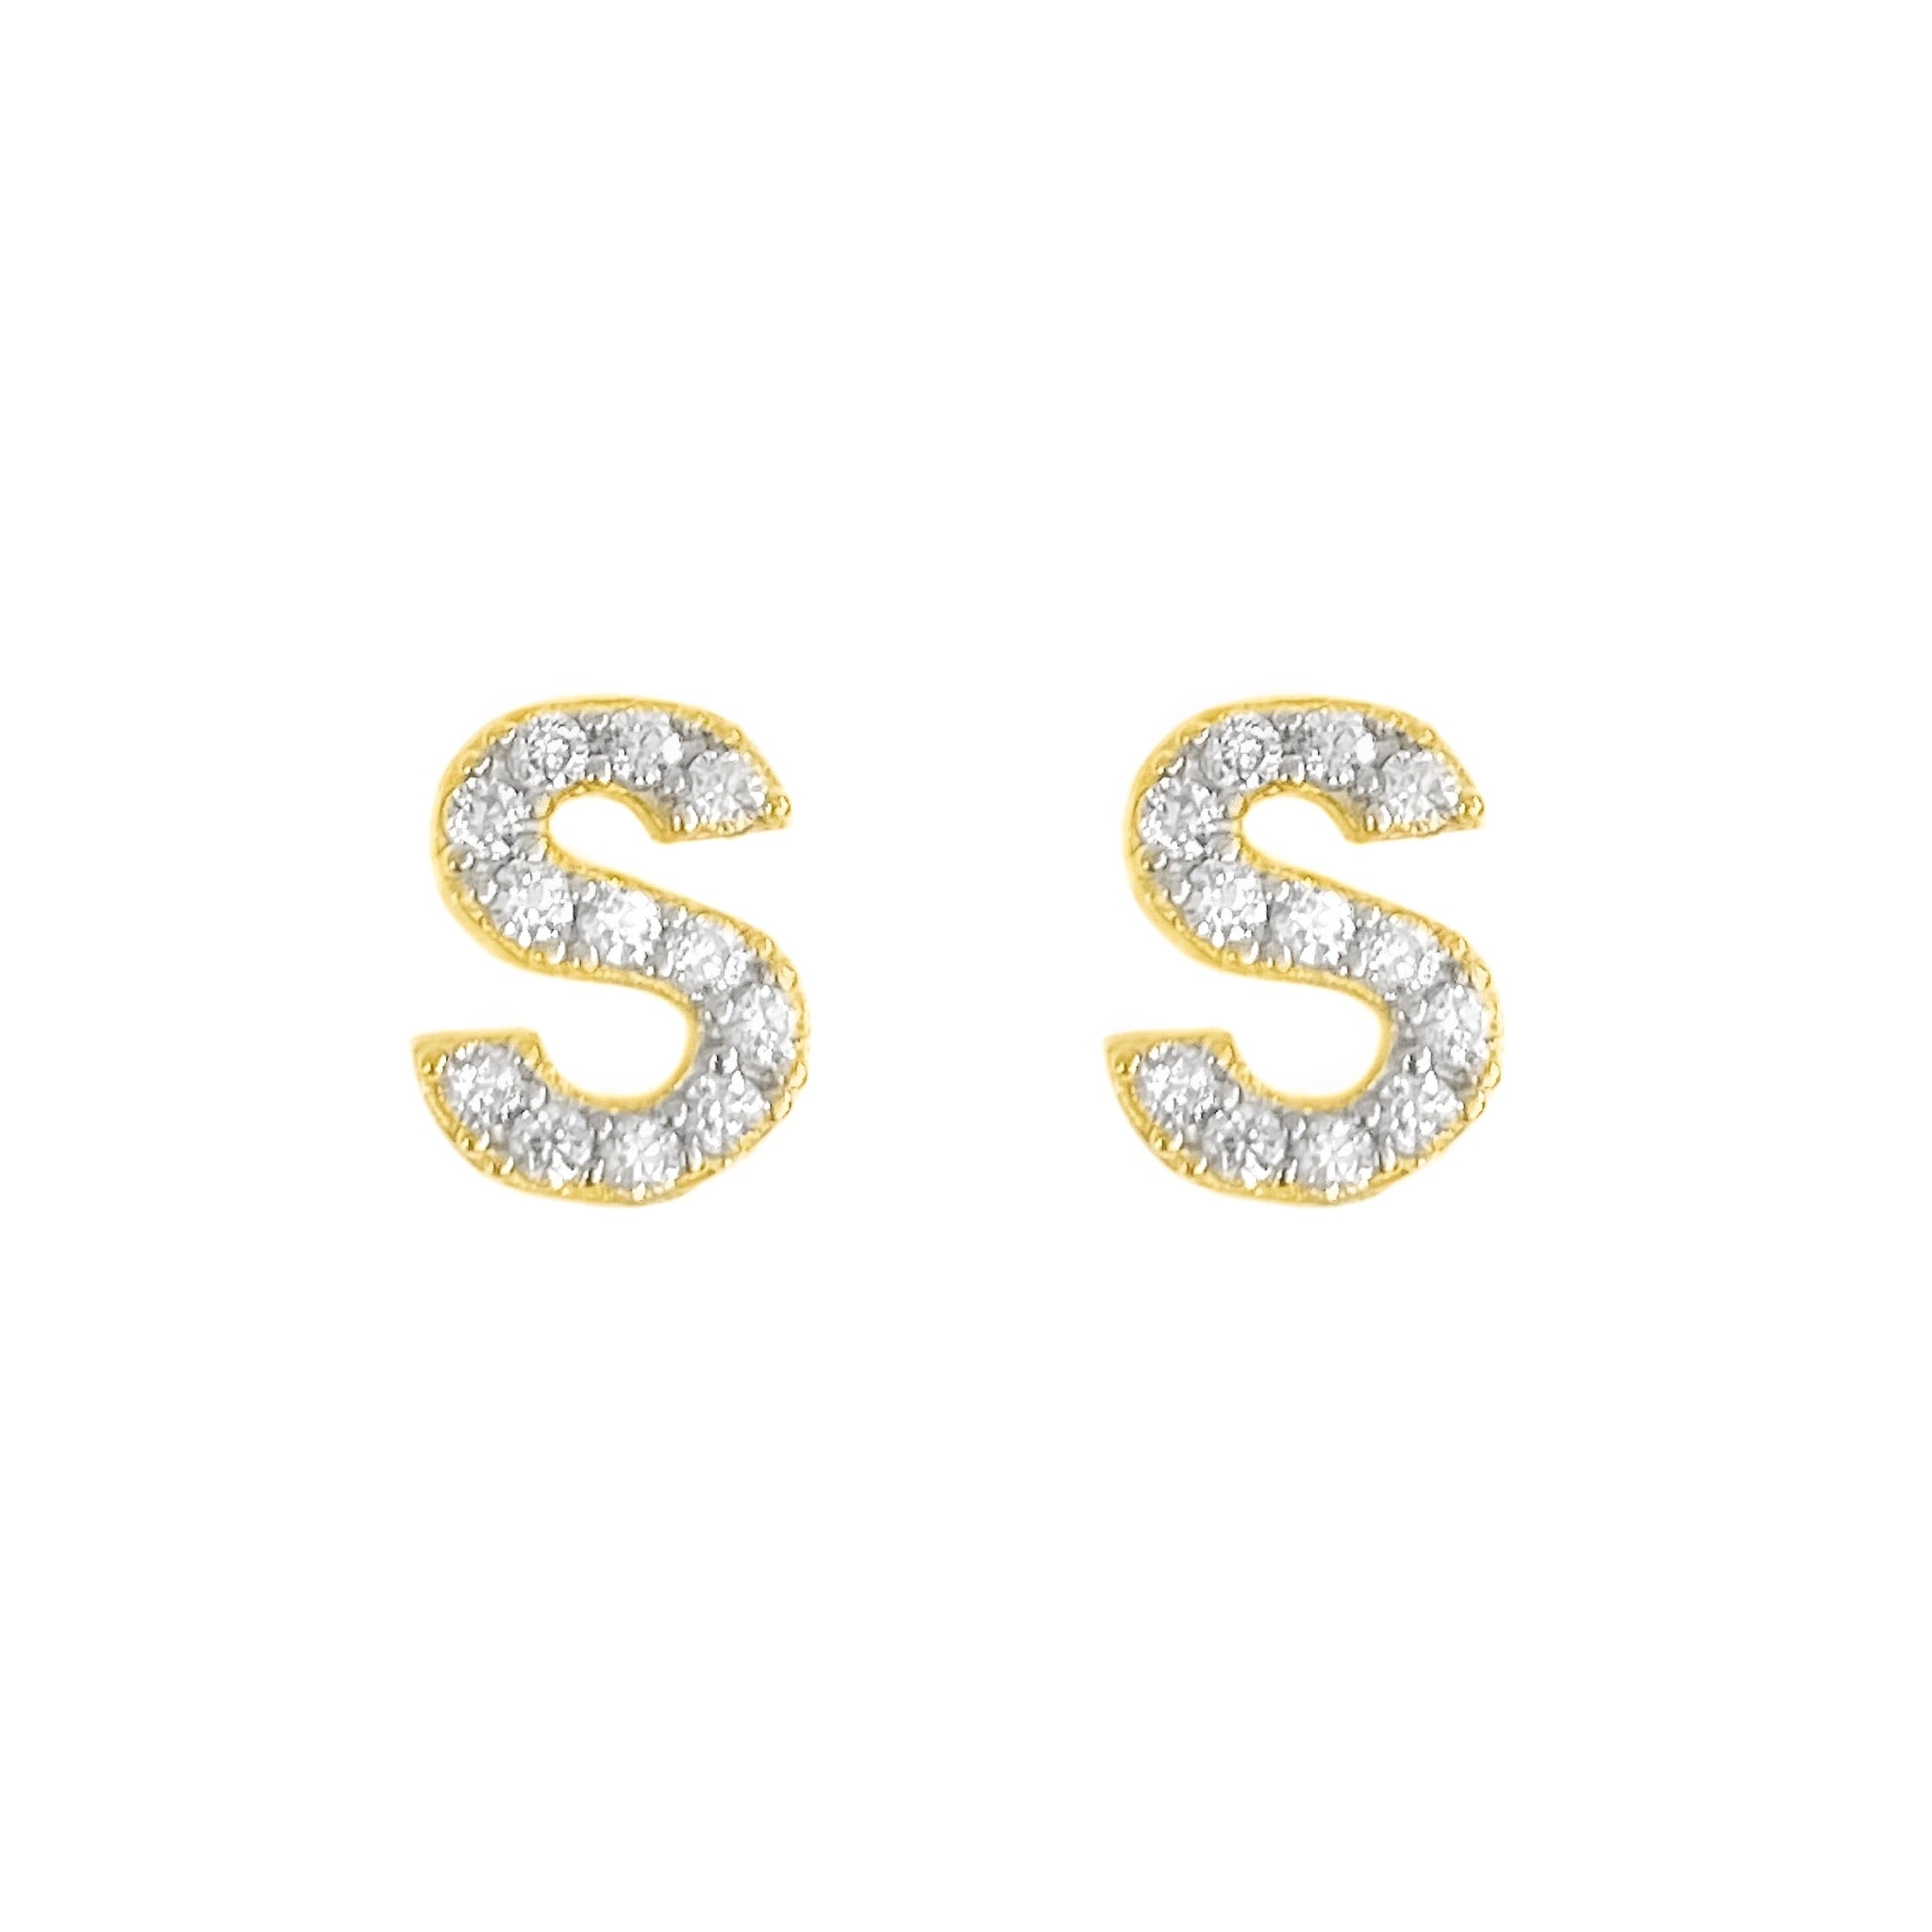 14K YELLOW GOLD PAVE INITIAL EARRINGS